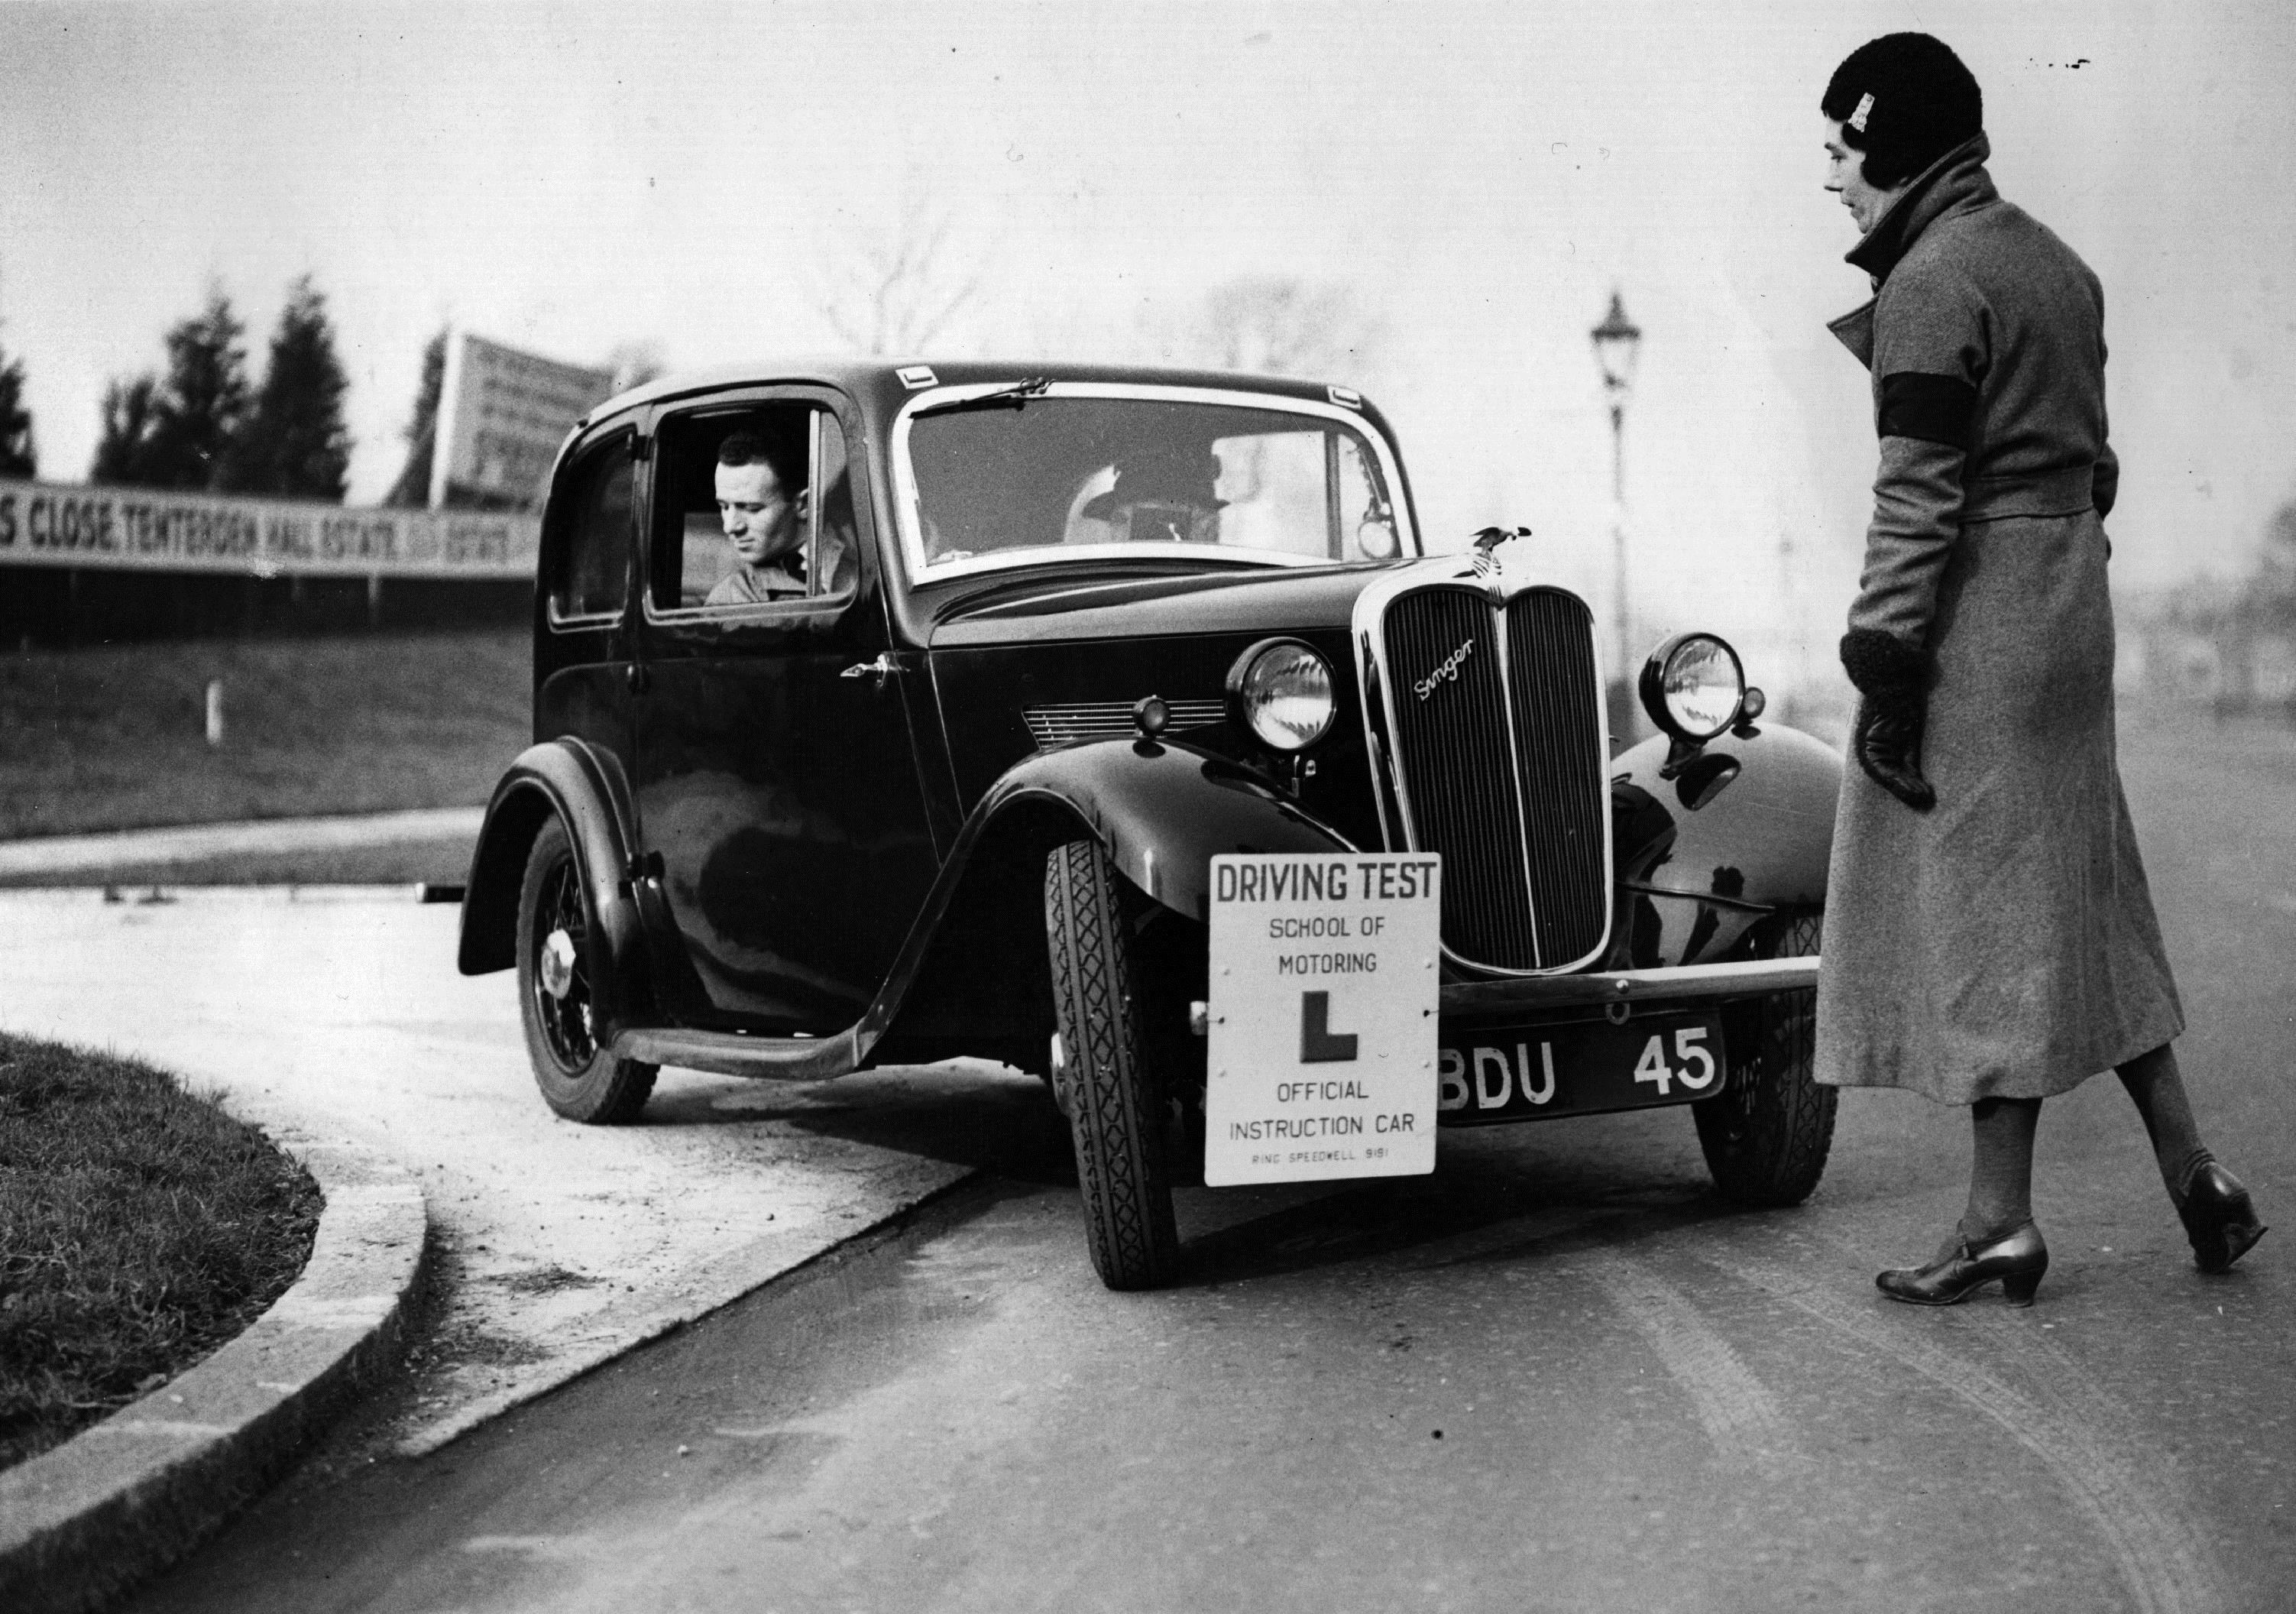 Video: On this day in 1935 a voluntary driving test was introduced in the UK - The Sunday Post